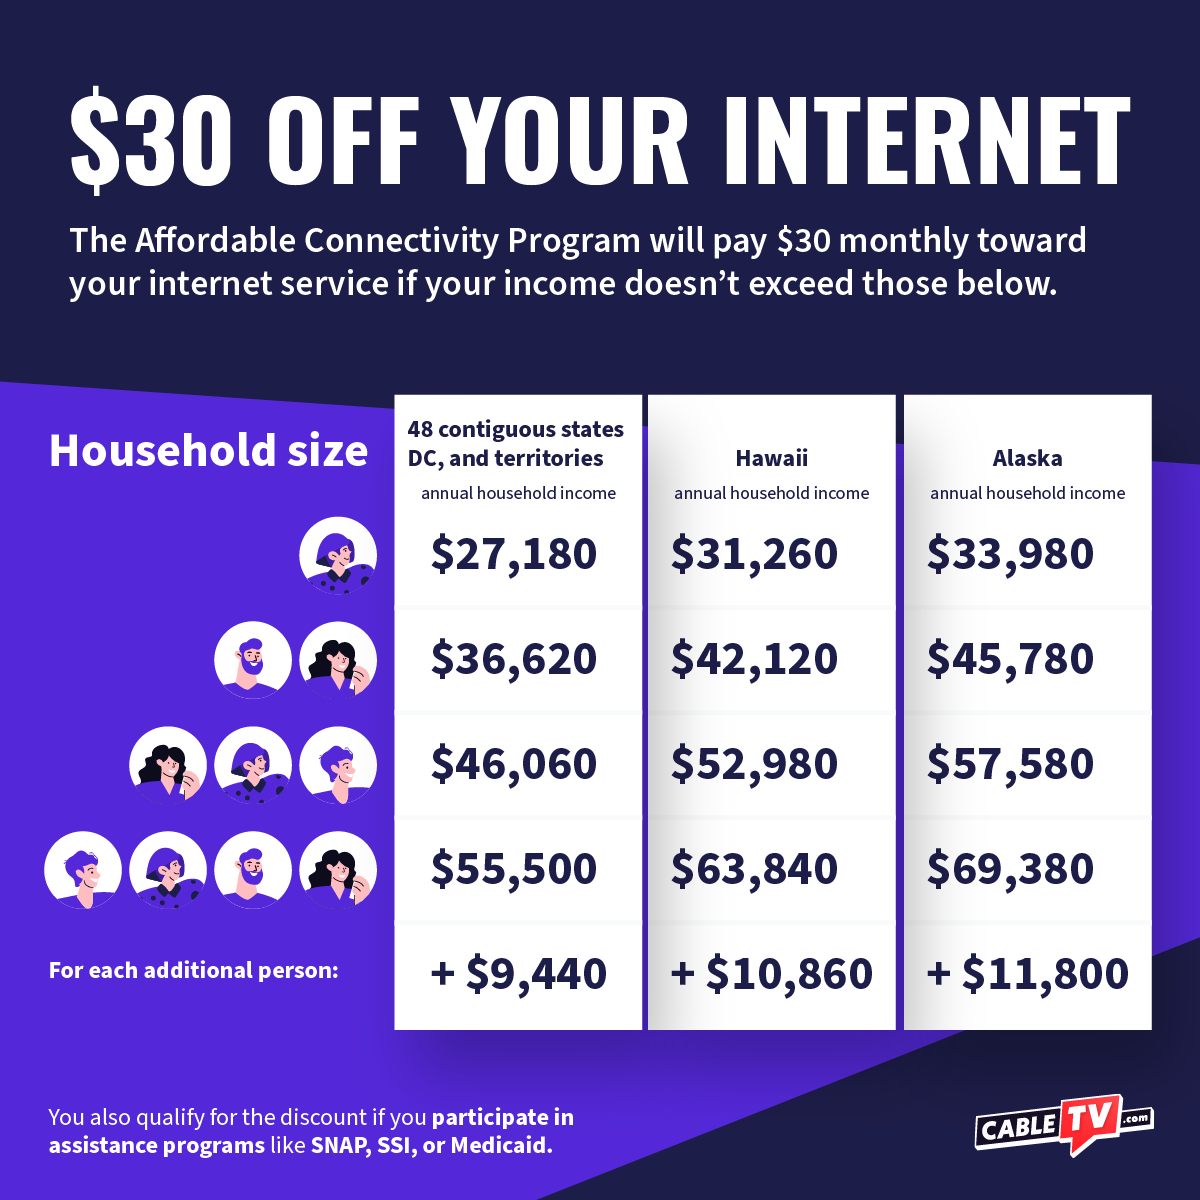 Graphic describing the requirements needed to qualify for the Affordable Connectivity Program